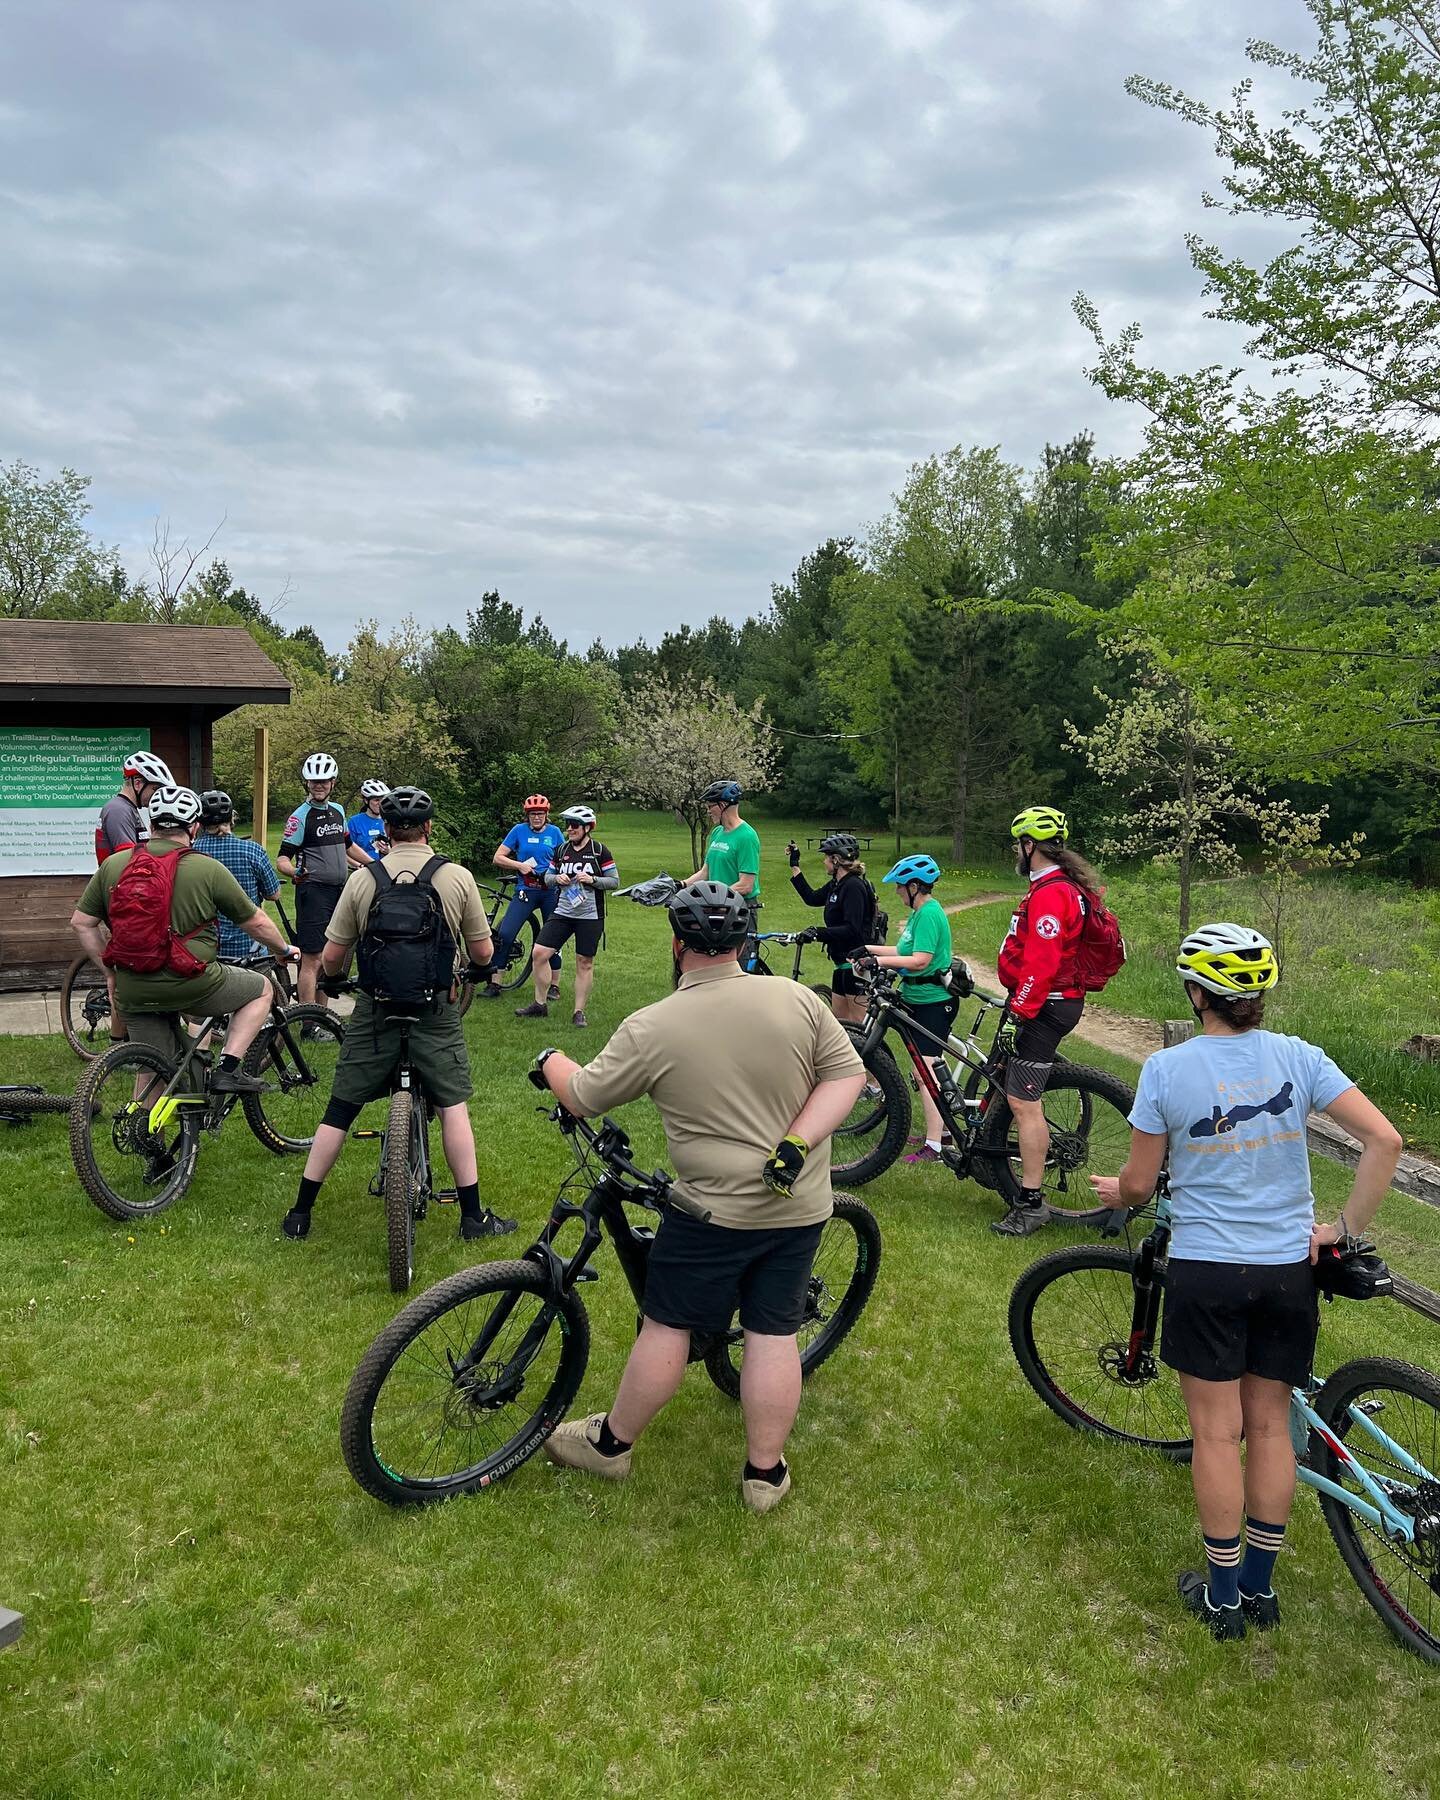 We had a great weekend at OutWIGo Green hosted by @wi_dnr. Even though the clouds looked ominous we were able to get a few people out on bikes thanks to @wheelandsprocket and @avantcyclecafe. To top it off @mini_switz hosted @skorr_wisconsin, @wiscon